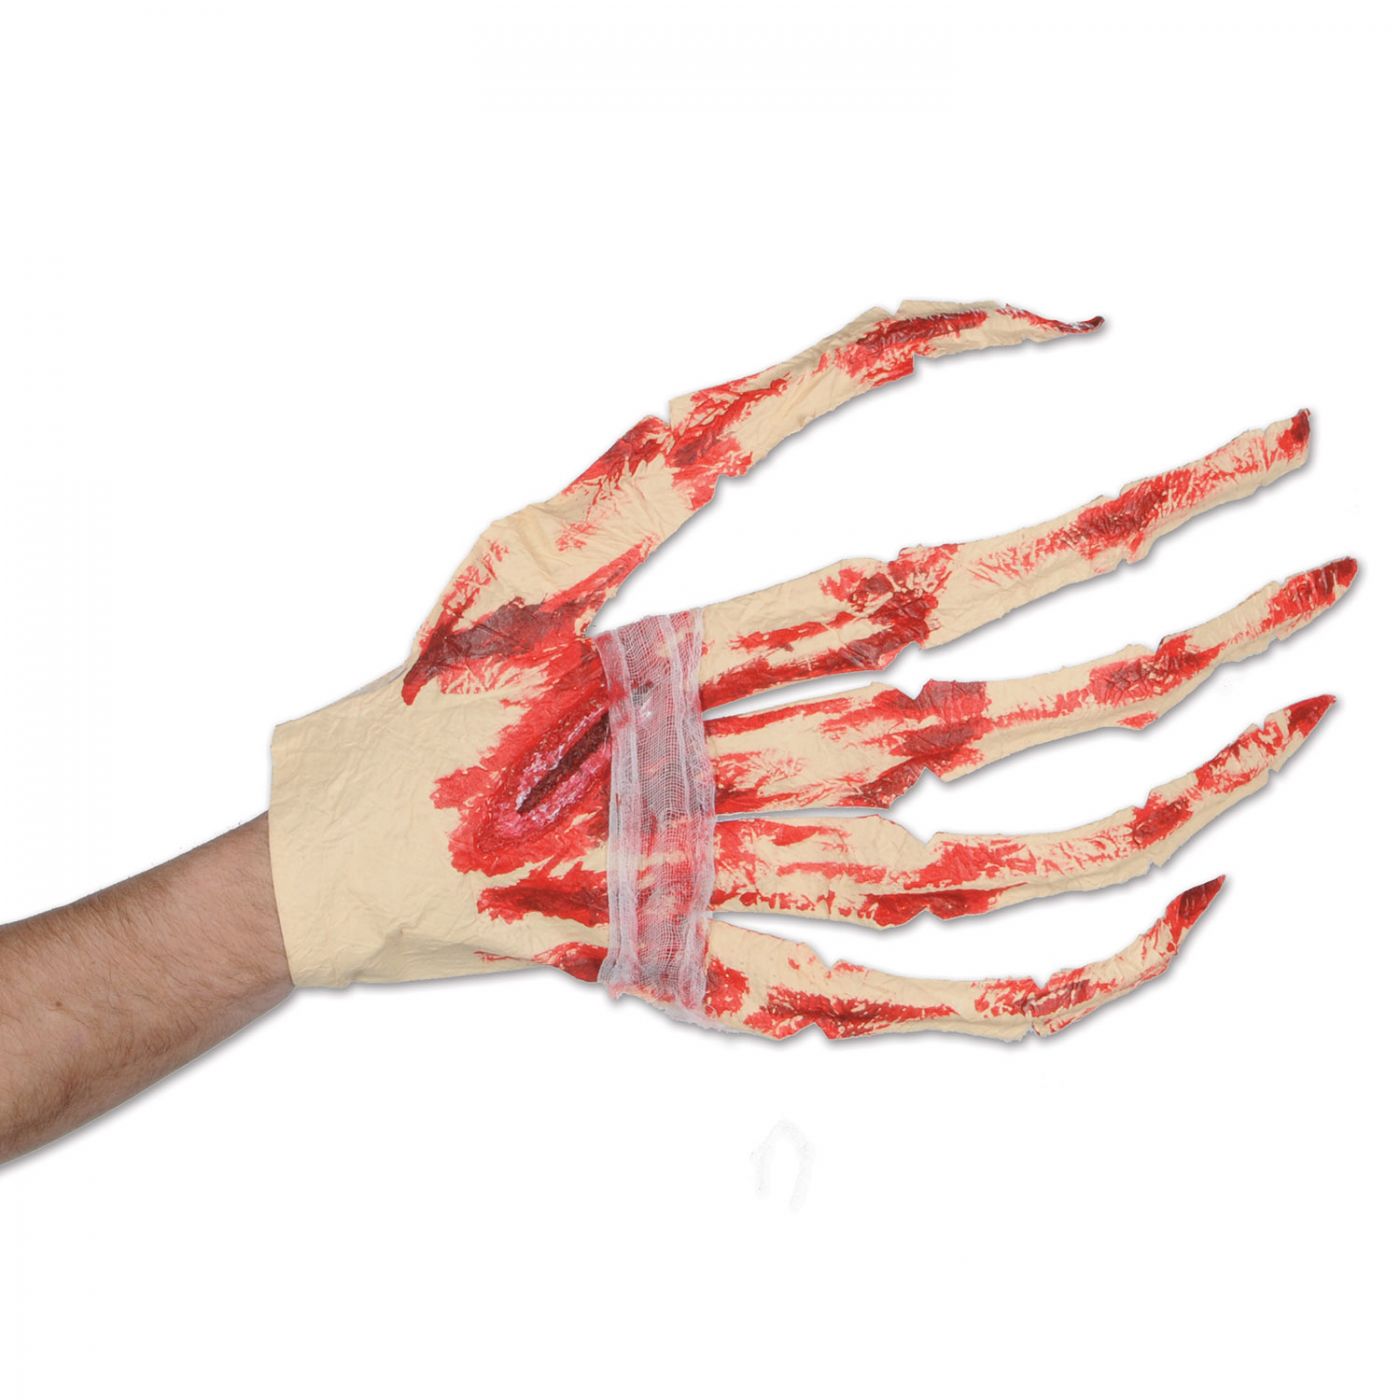 Image of Bloody Glove